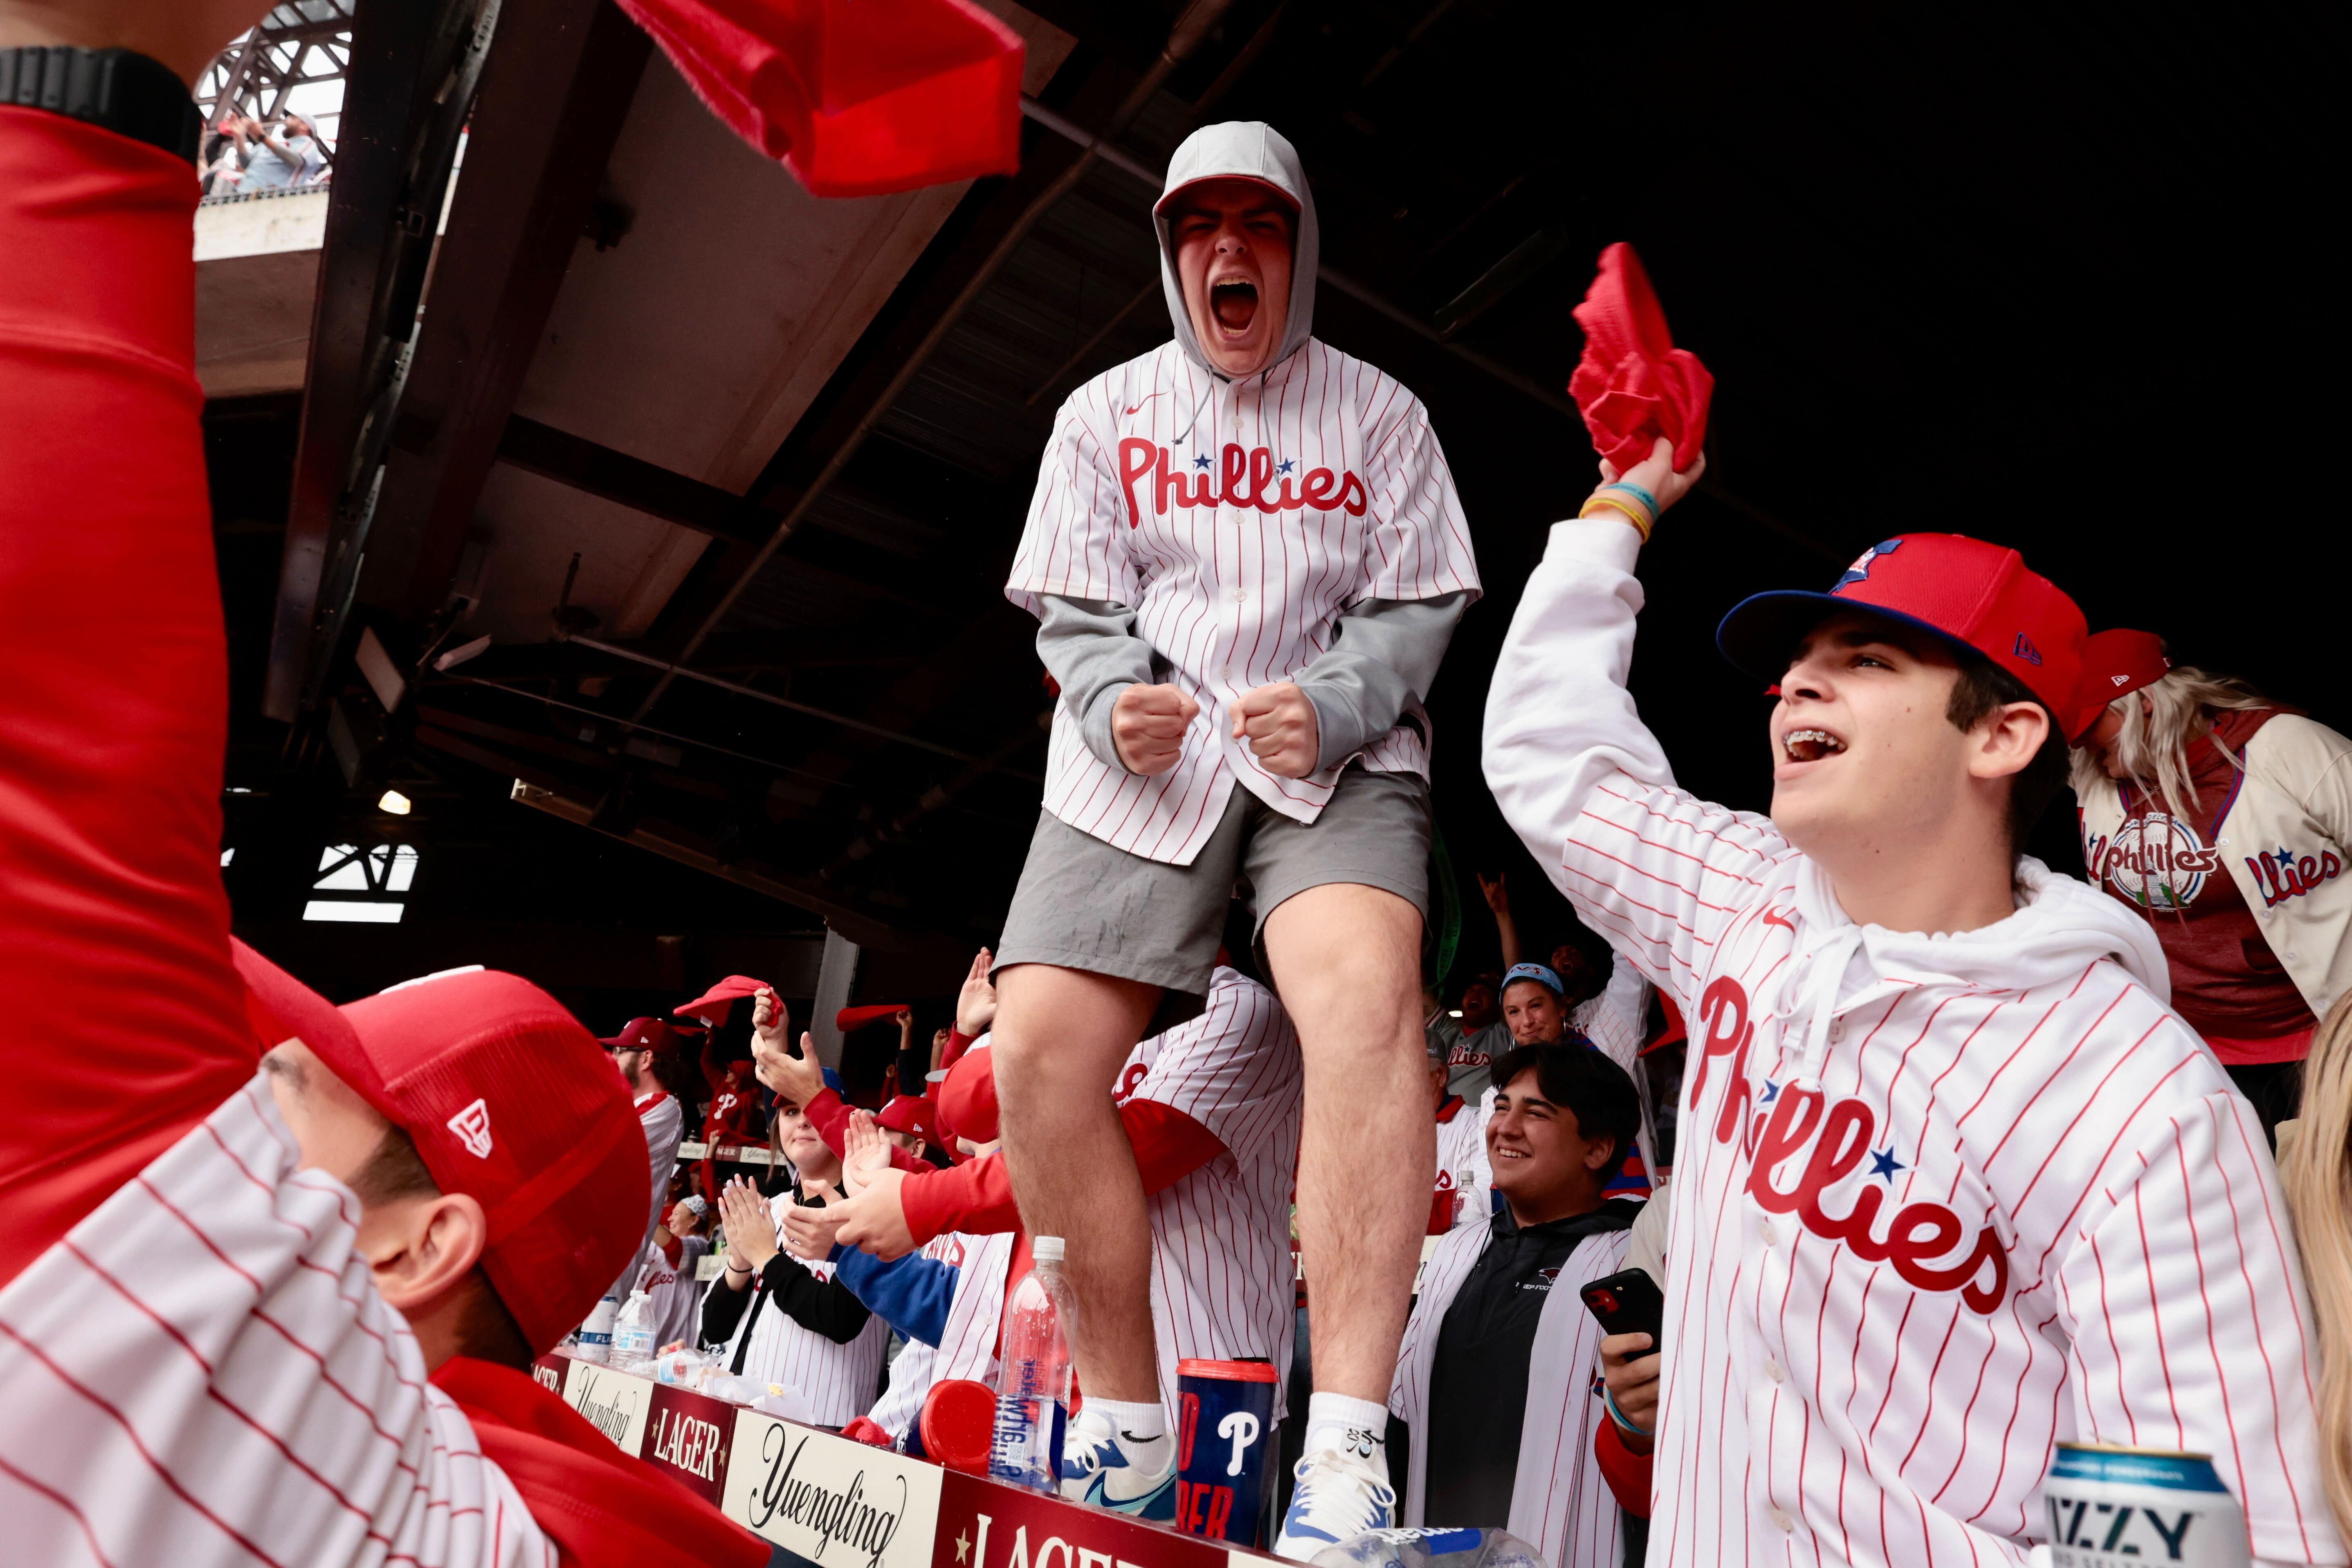 Zoren: Hats off to the Phillies and the Union even in losses